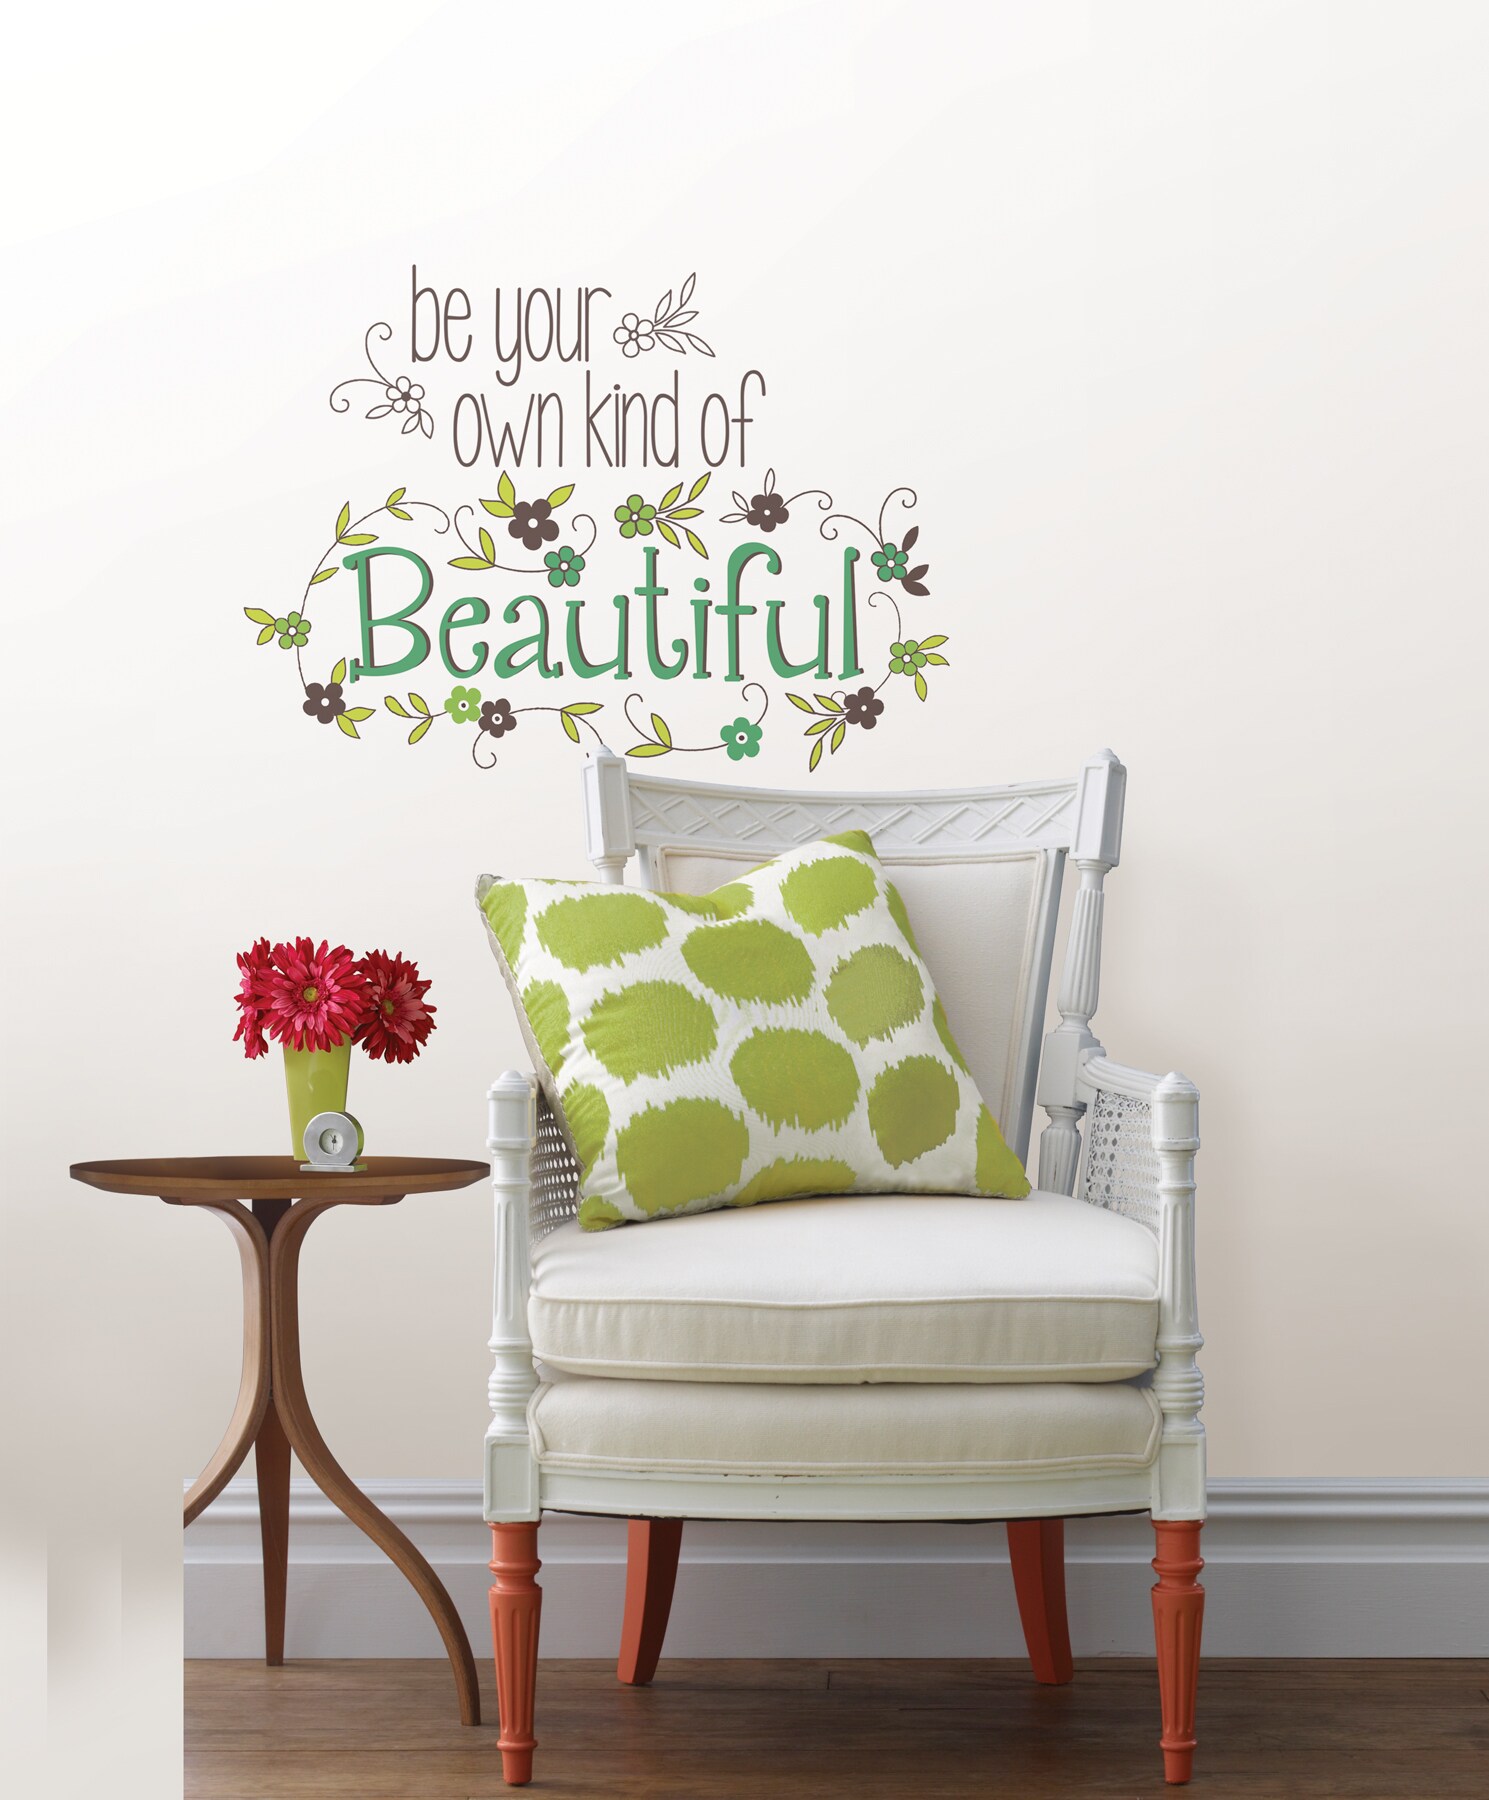 WallPops 17.25-in W x 19.5-in H Self-adhesive Green Quotes and Sayings Wall  Decal at